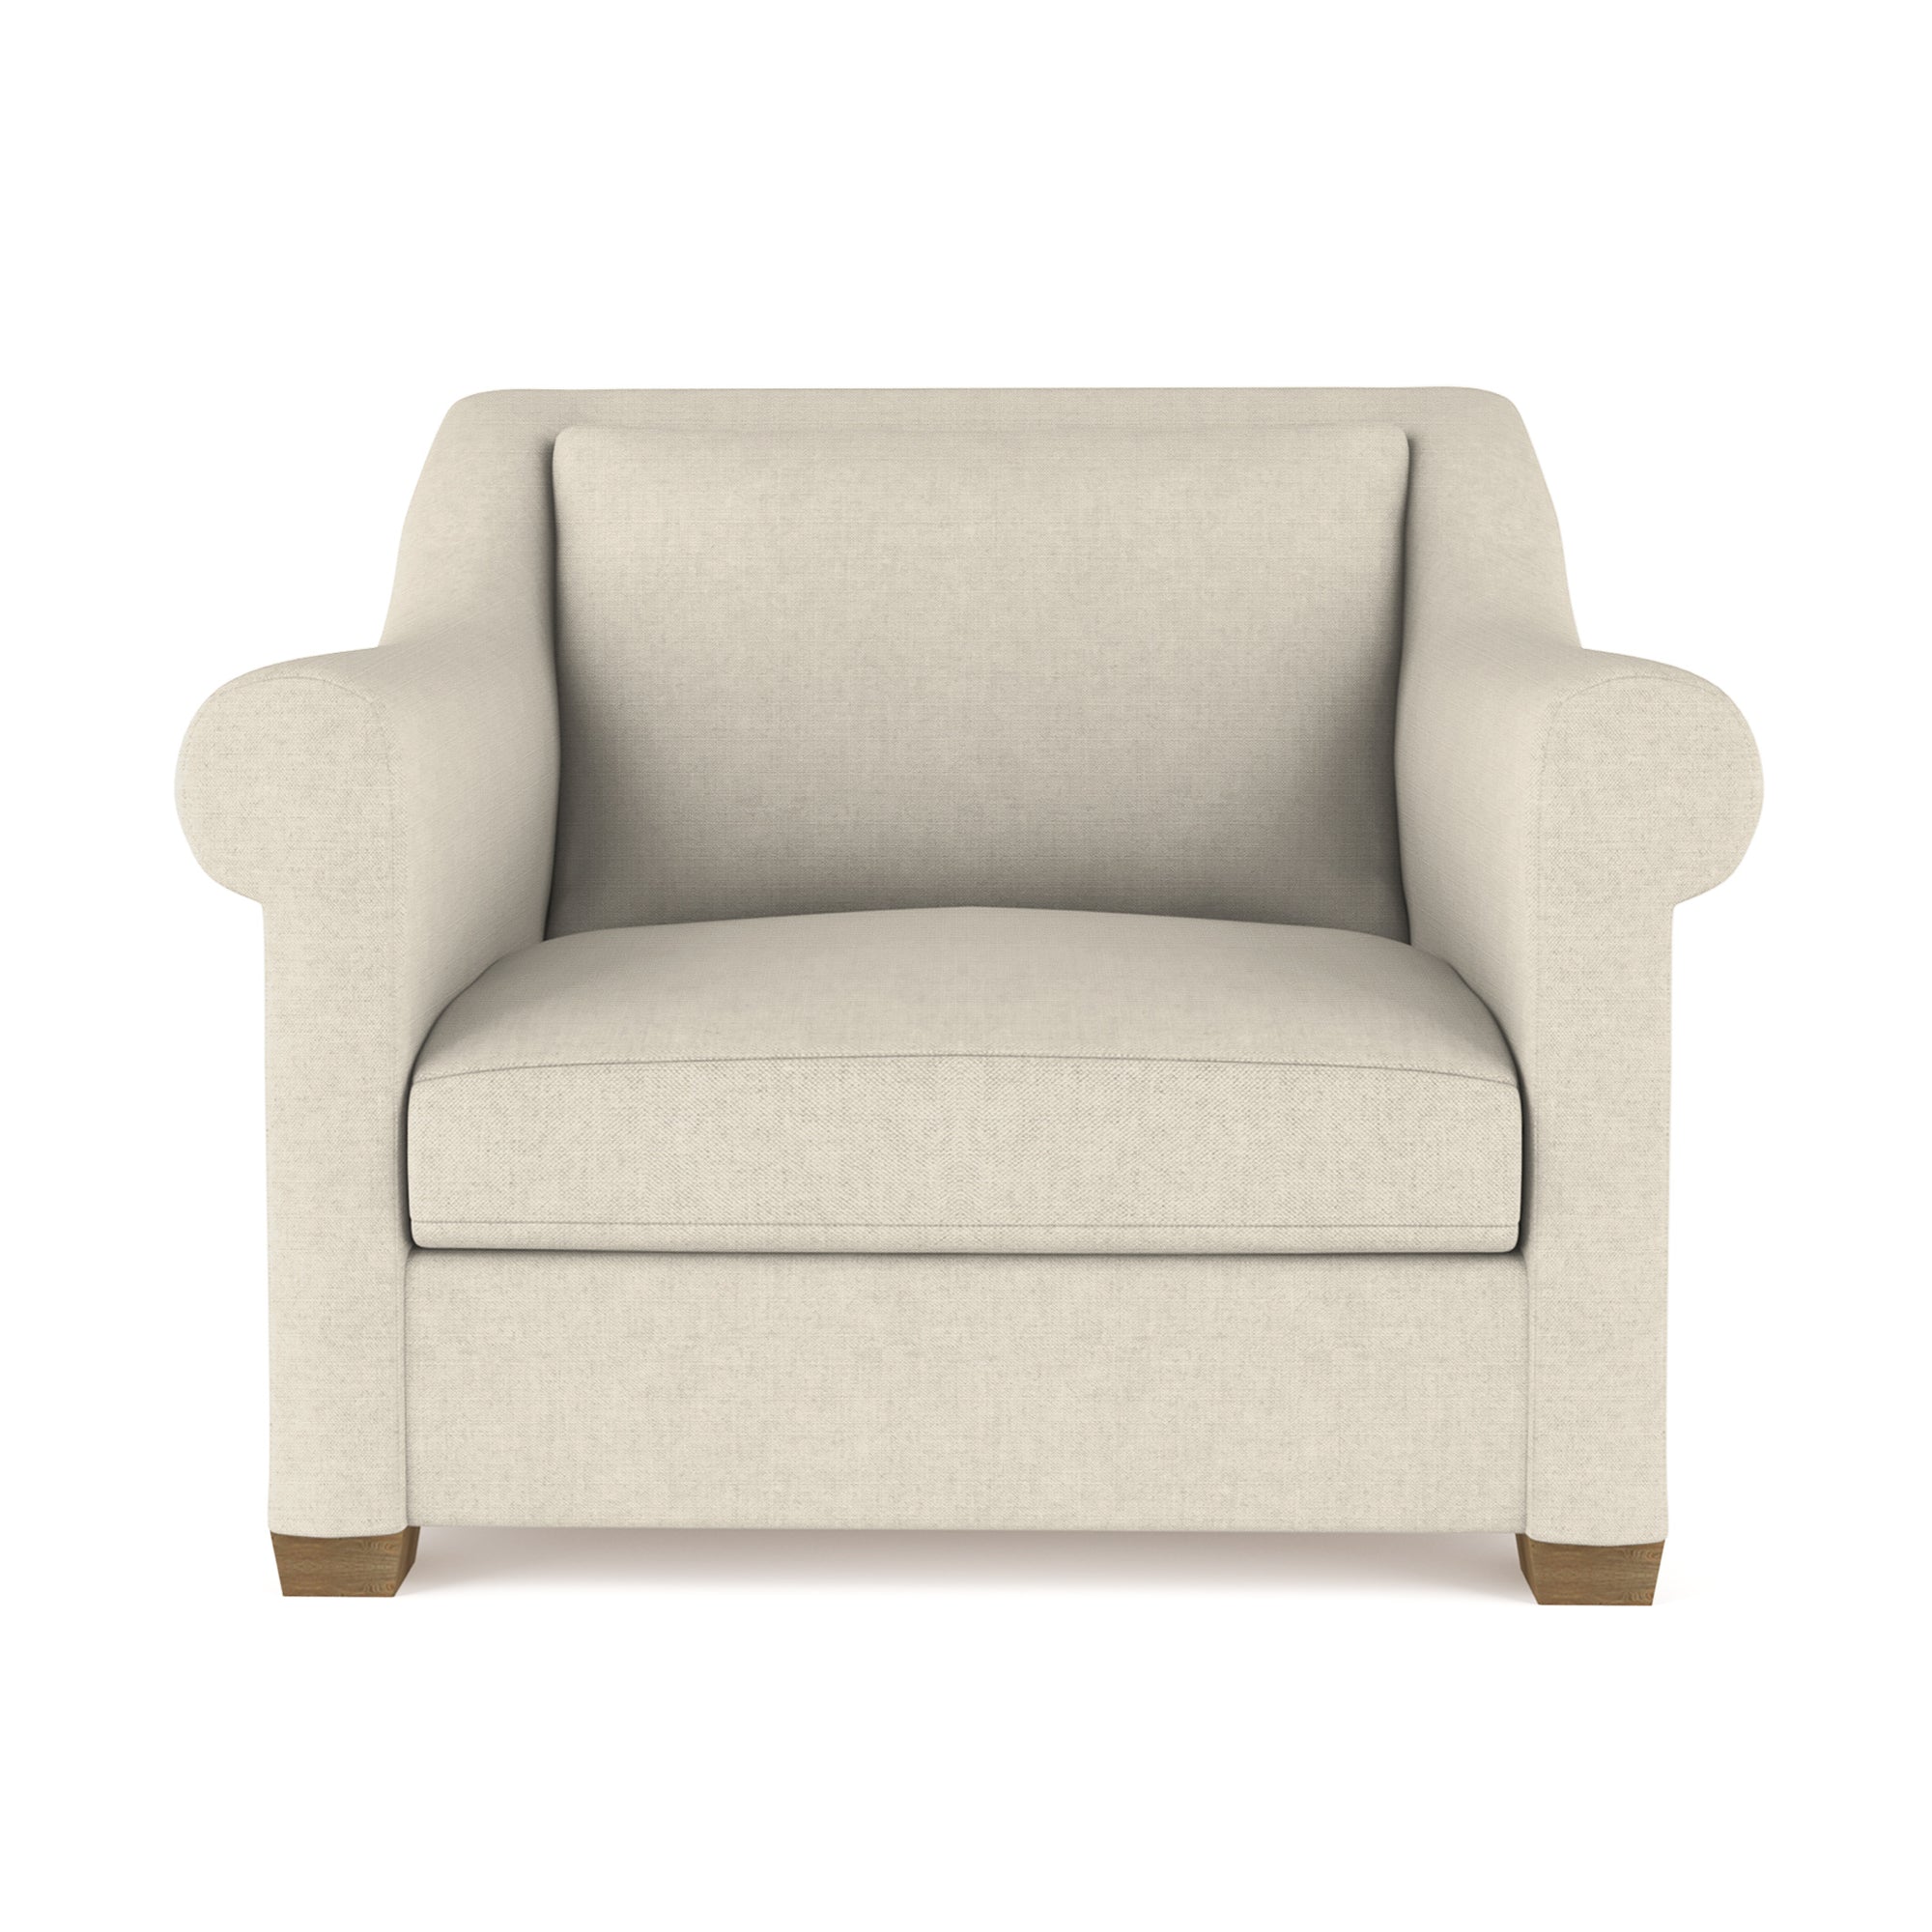 Thompson Chair - Oyster Box Weave Linen